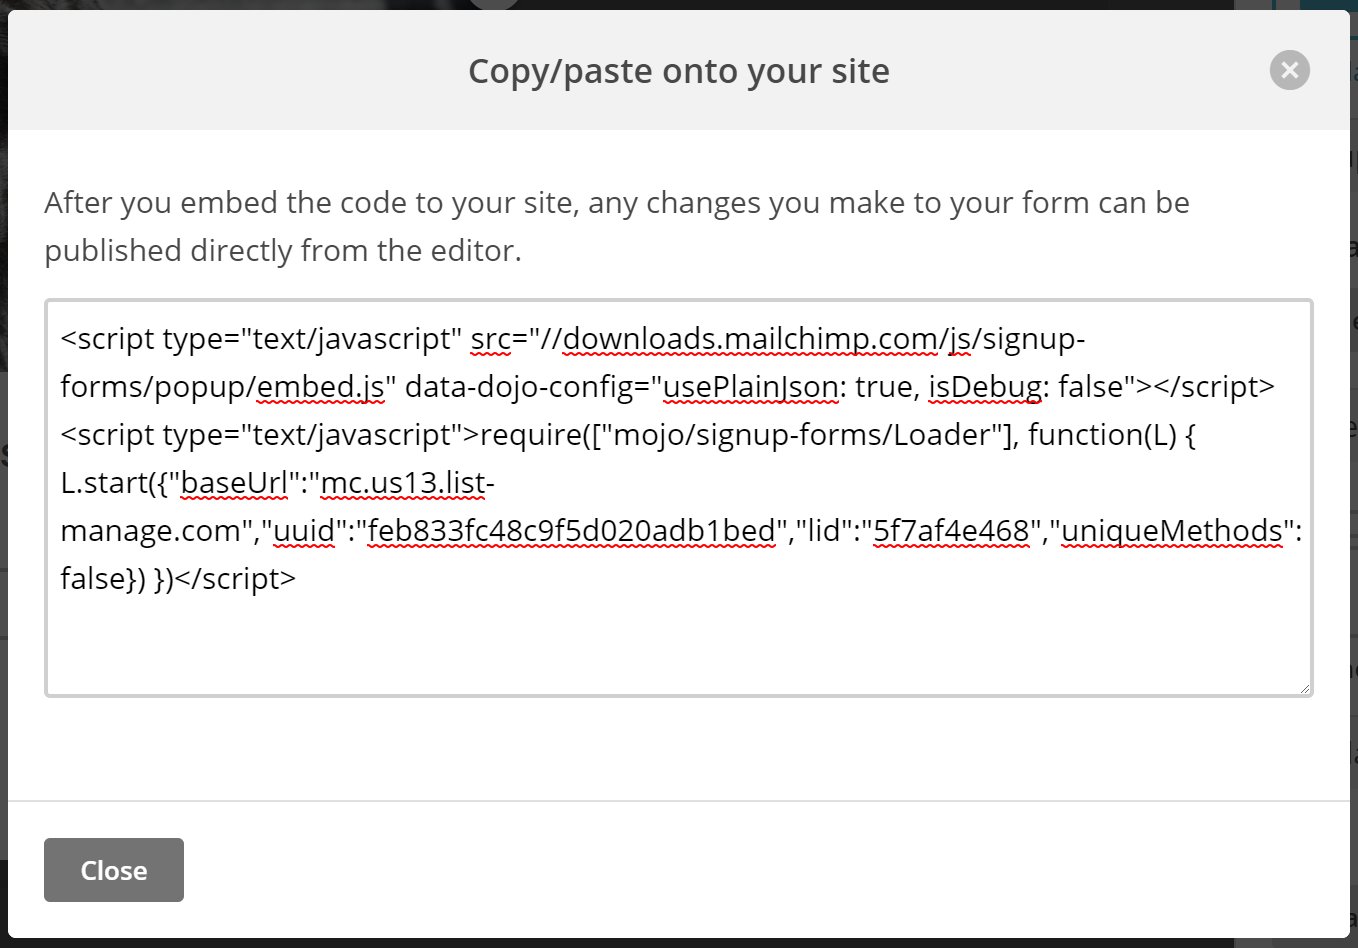 You can embed your sign-up form by copying and pasting the code to your site